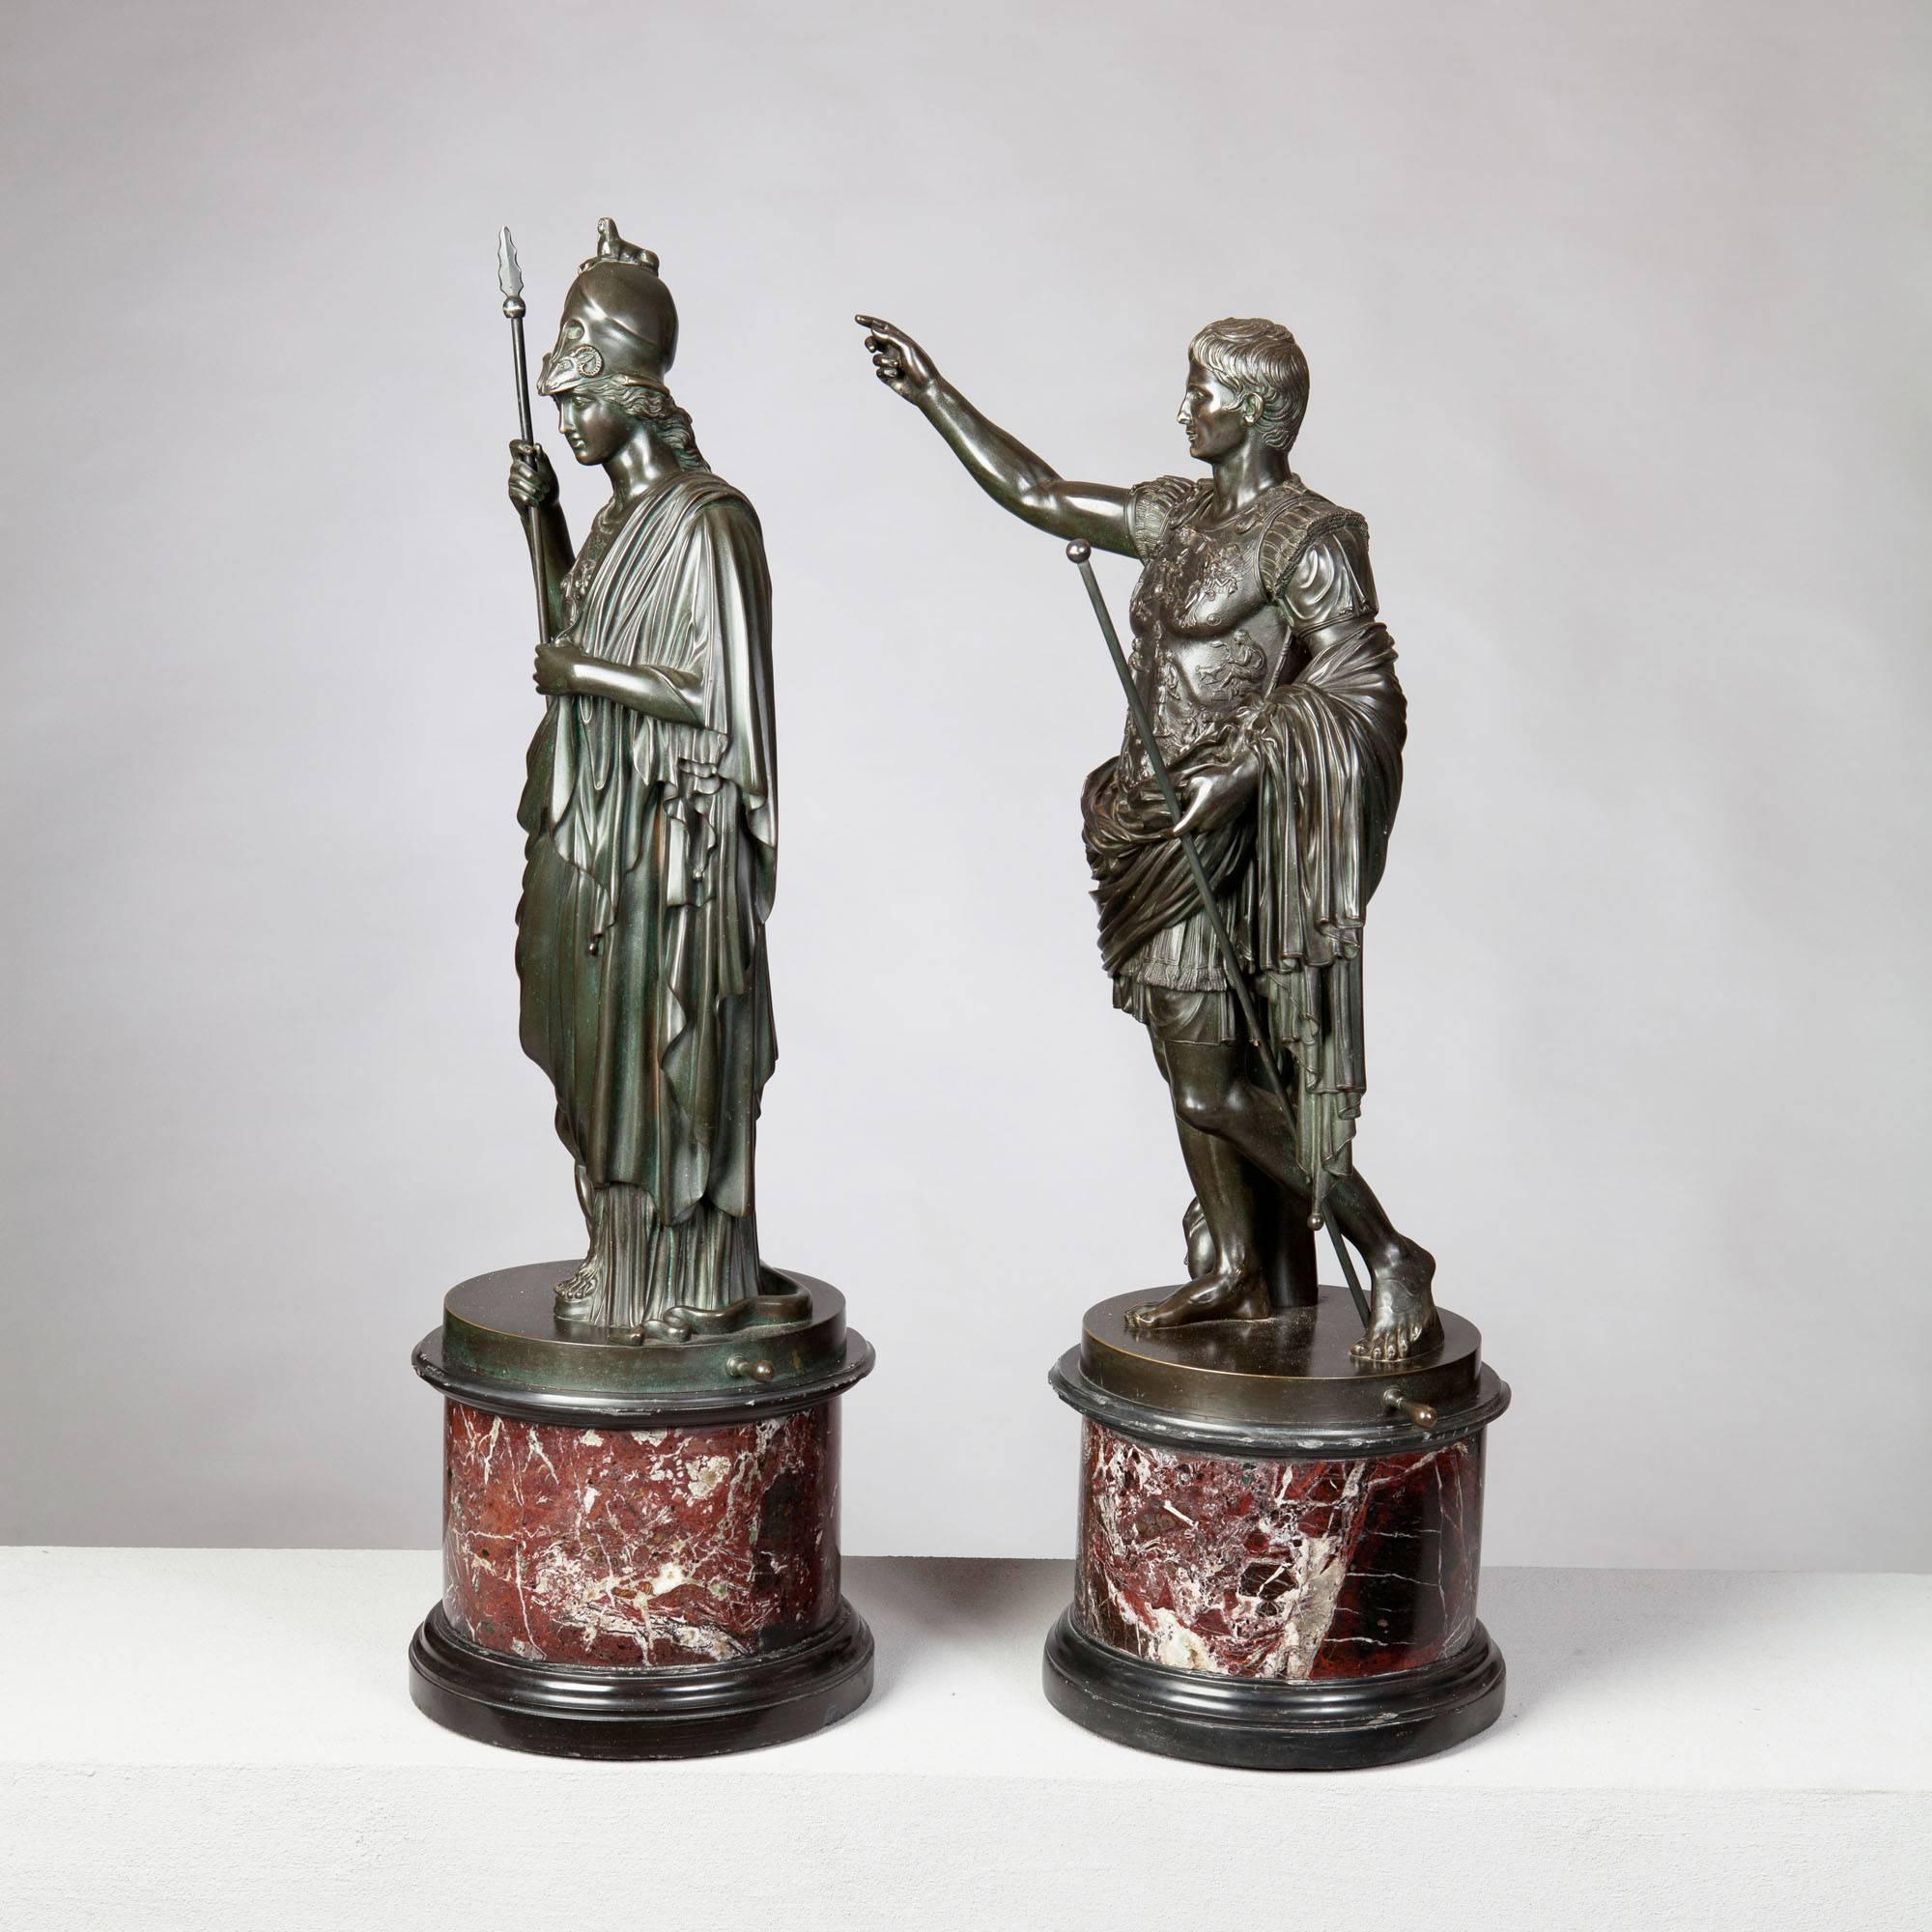 A pair of fine 19th-century bronze statues of Minerva and the Roman Emperor Augustus, both finely cast and patinated with a slight green tone. Both raised on their original rouge marble bases. 

Height including plinth 26in.
​Diameter